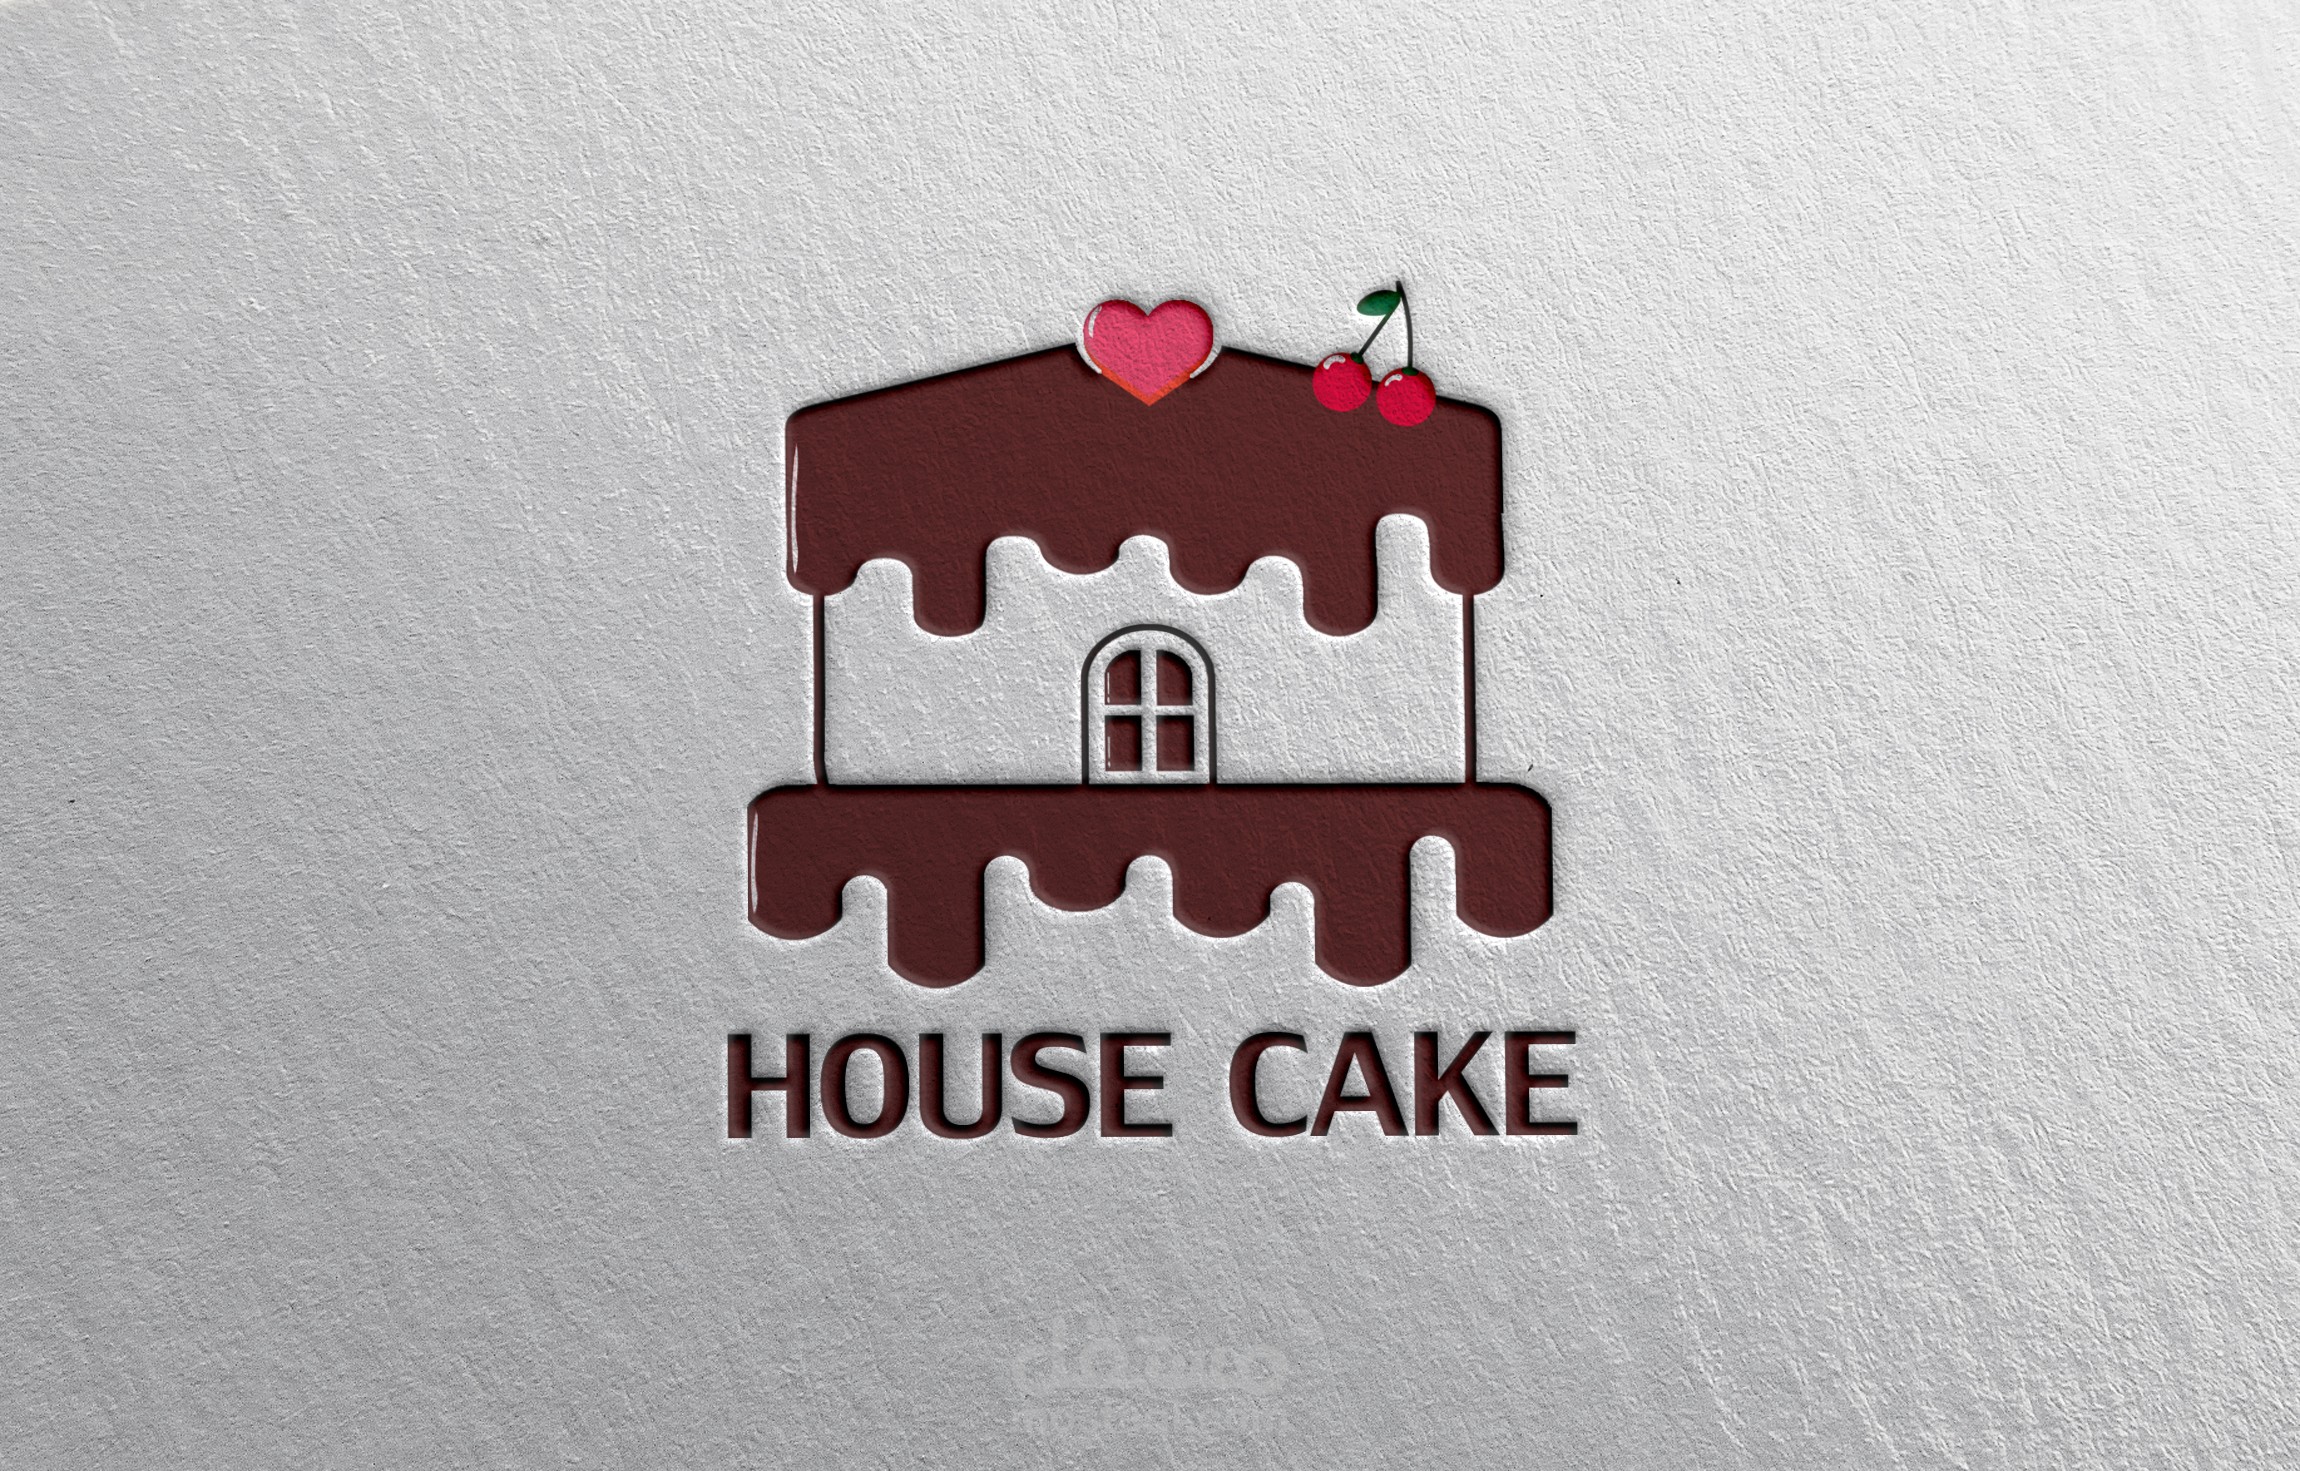 The Cake House Bakers in Manikonda,Hyderabad - Best Cake Shops in Hyderabad  - Justdial